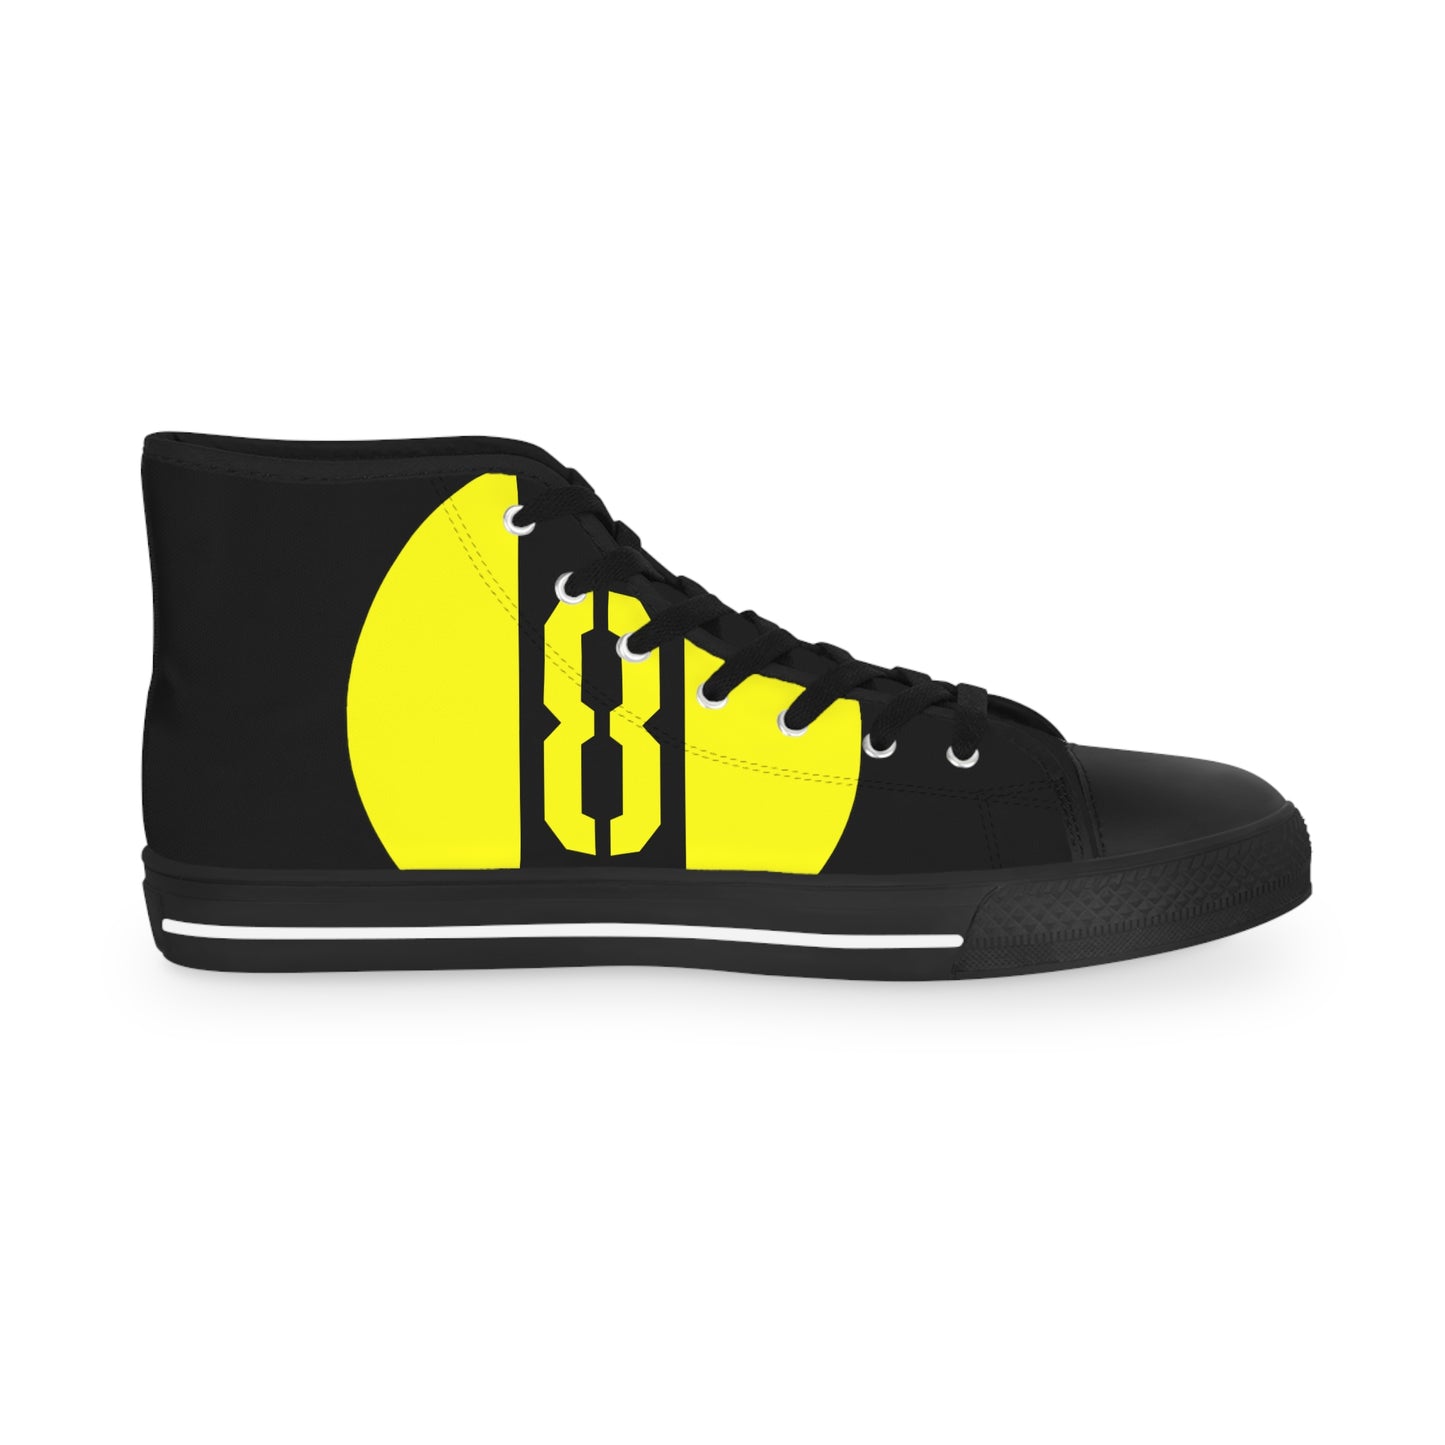 Limited Edition High Top Sneakers - 8 - Black